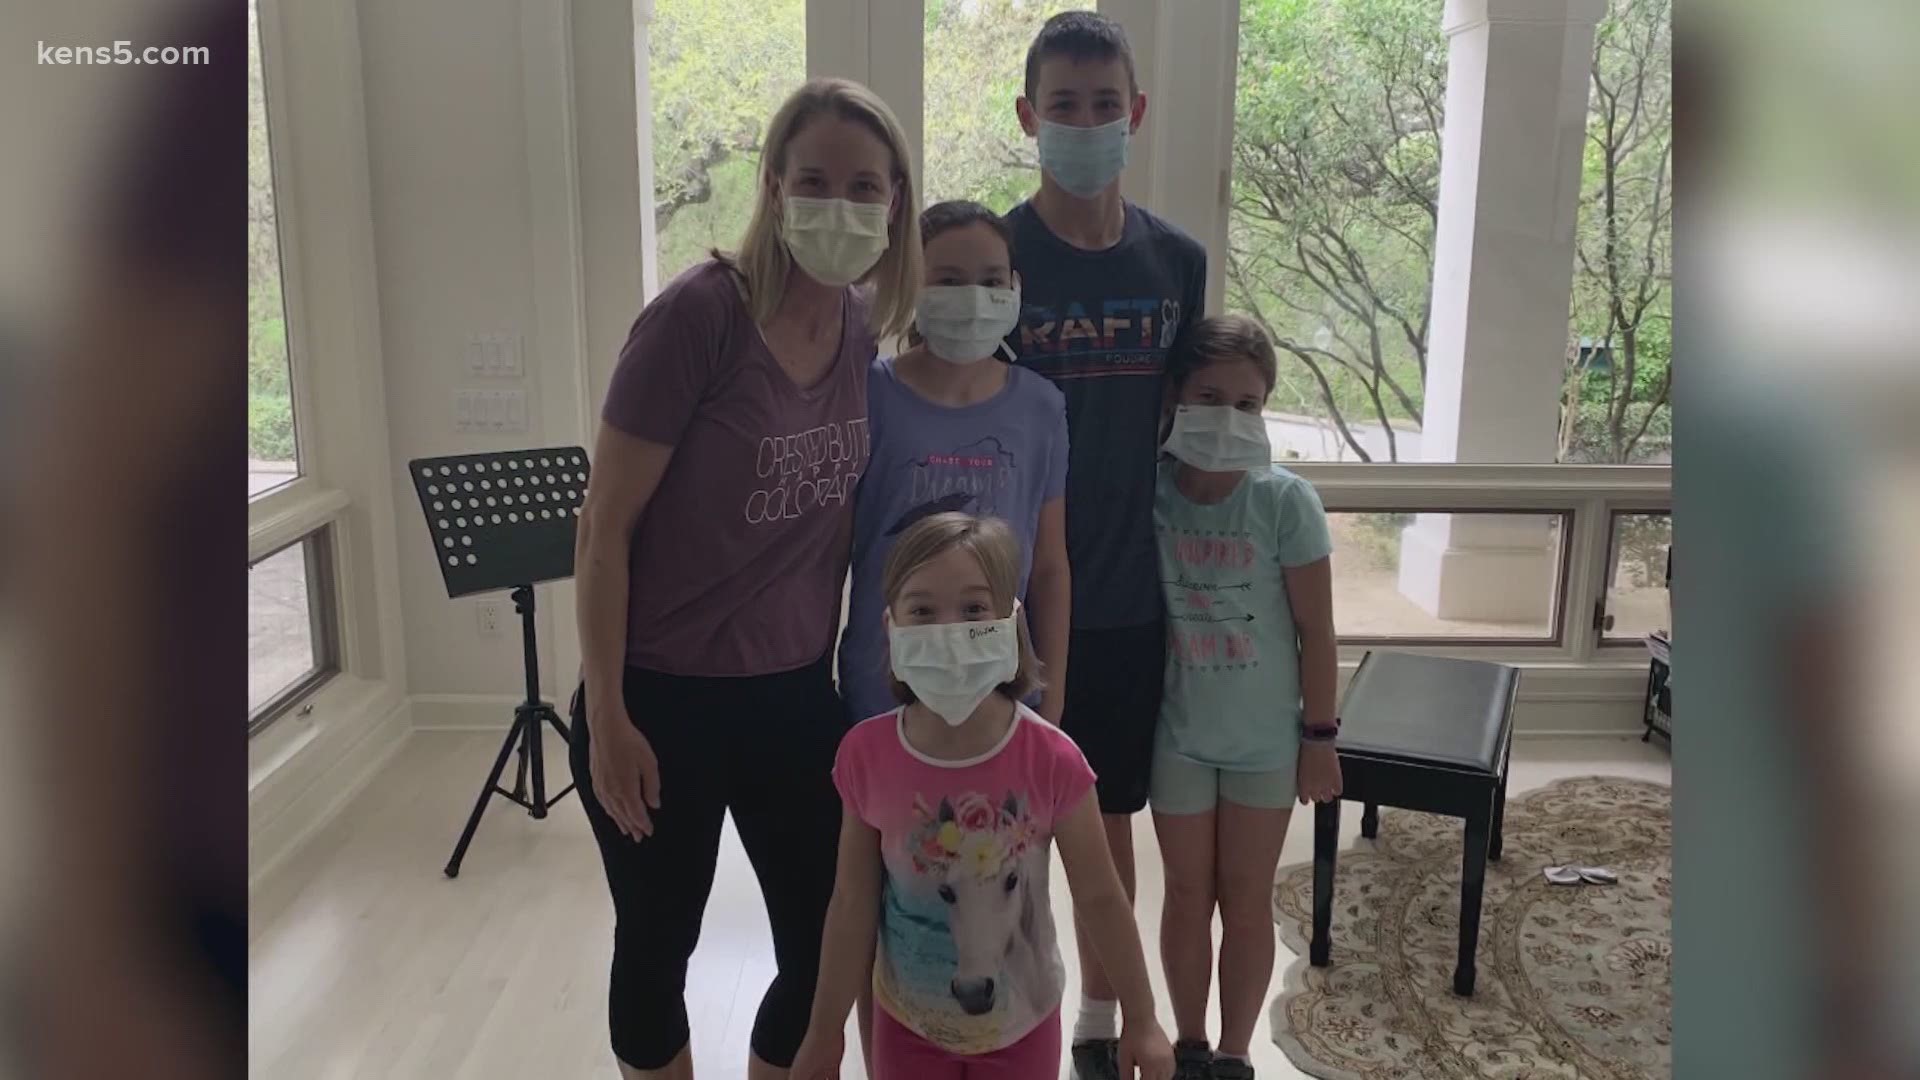 The doctor and his family went to Colorado for a ski trip in March, before the pandemic upended routine ways of life. He and his wife both tested positive soonafter.